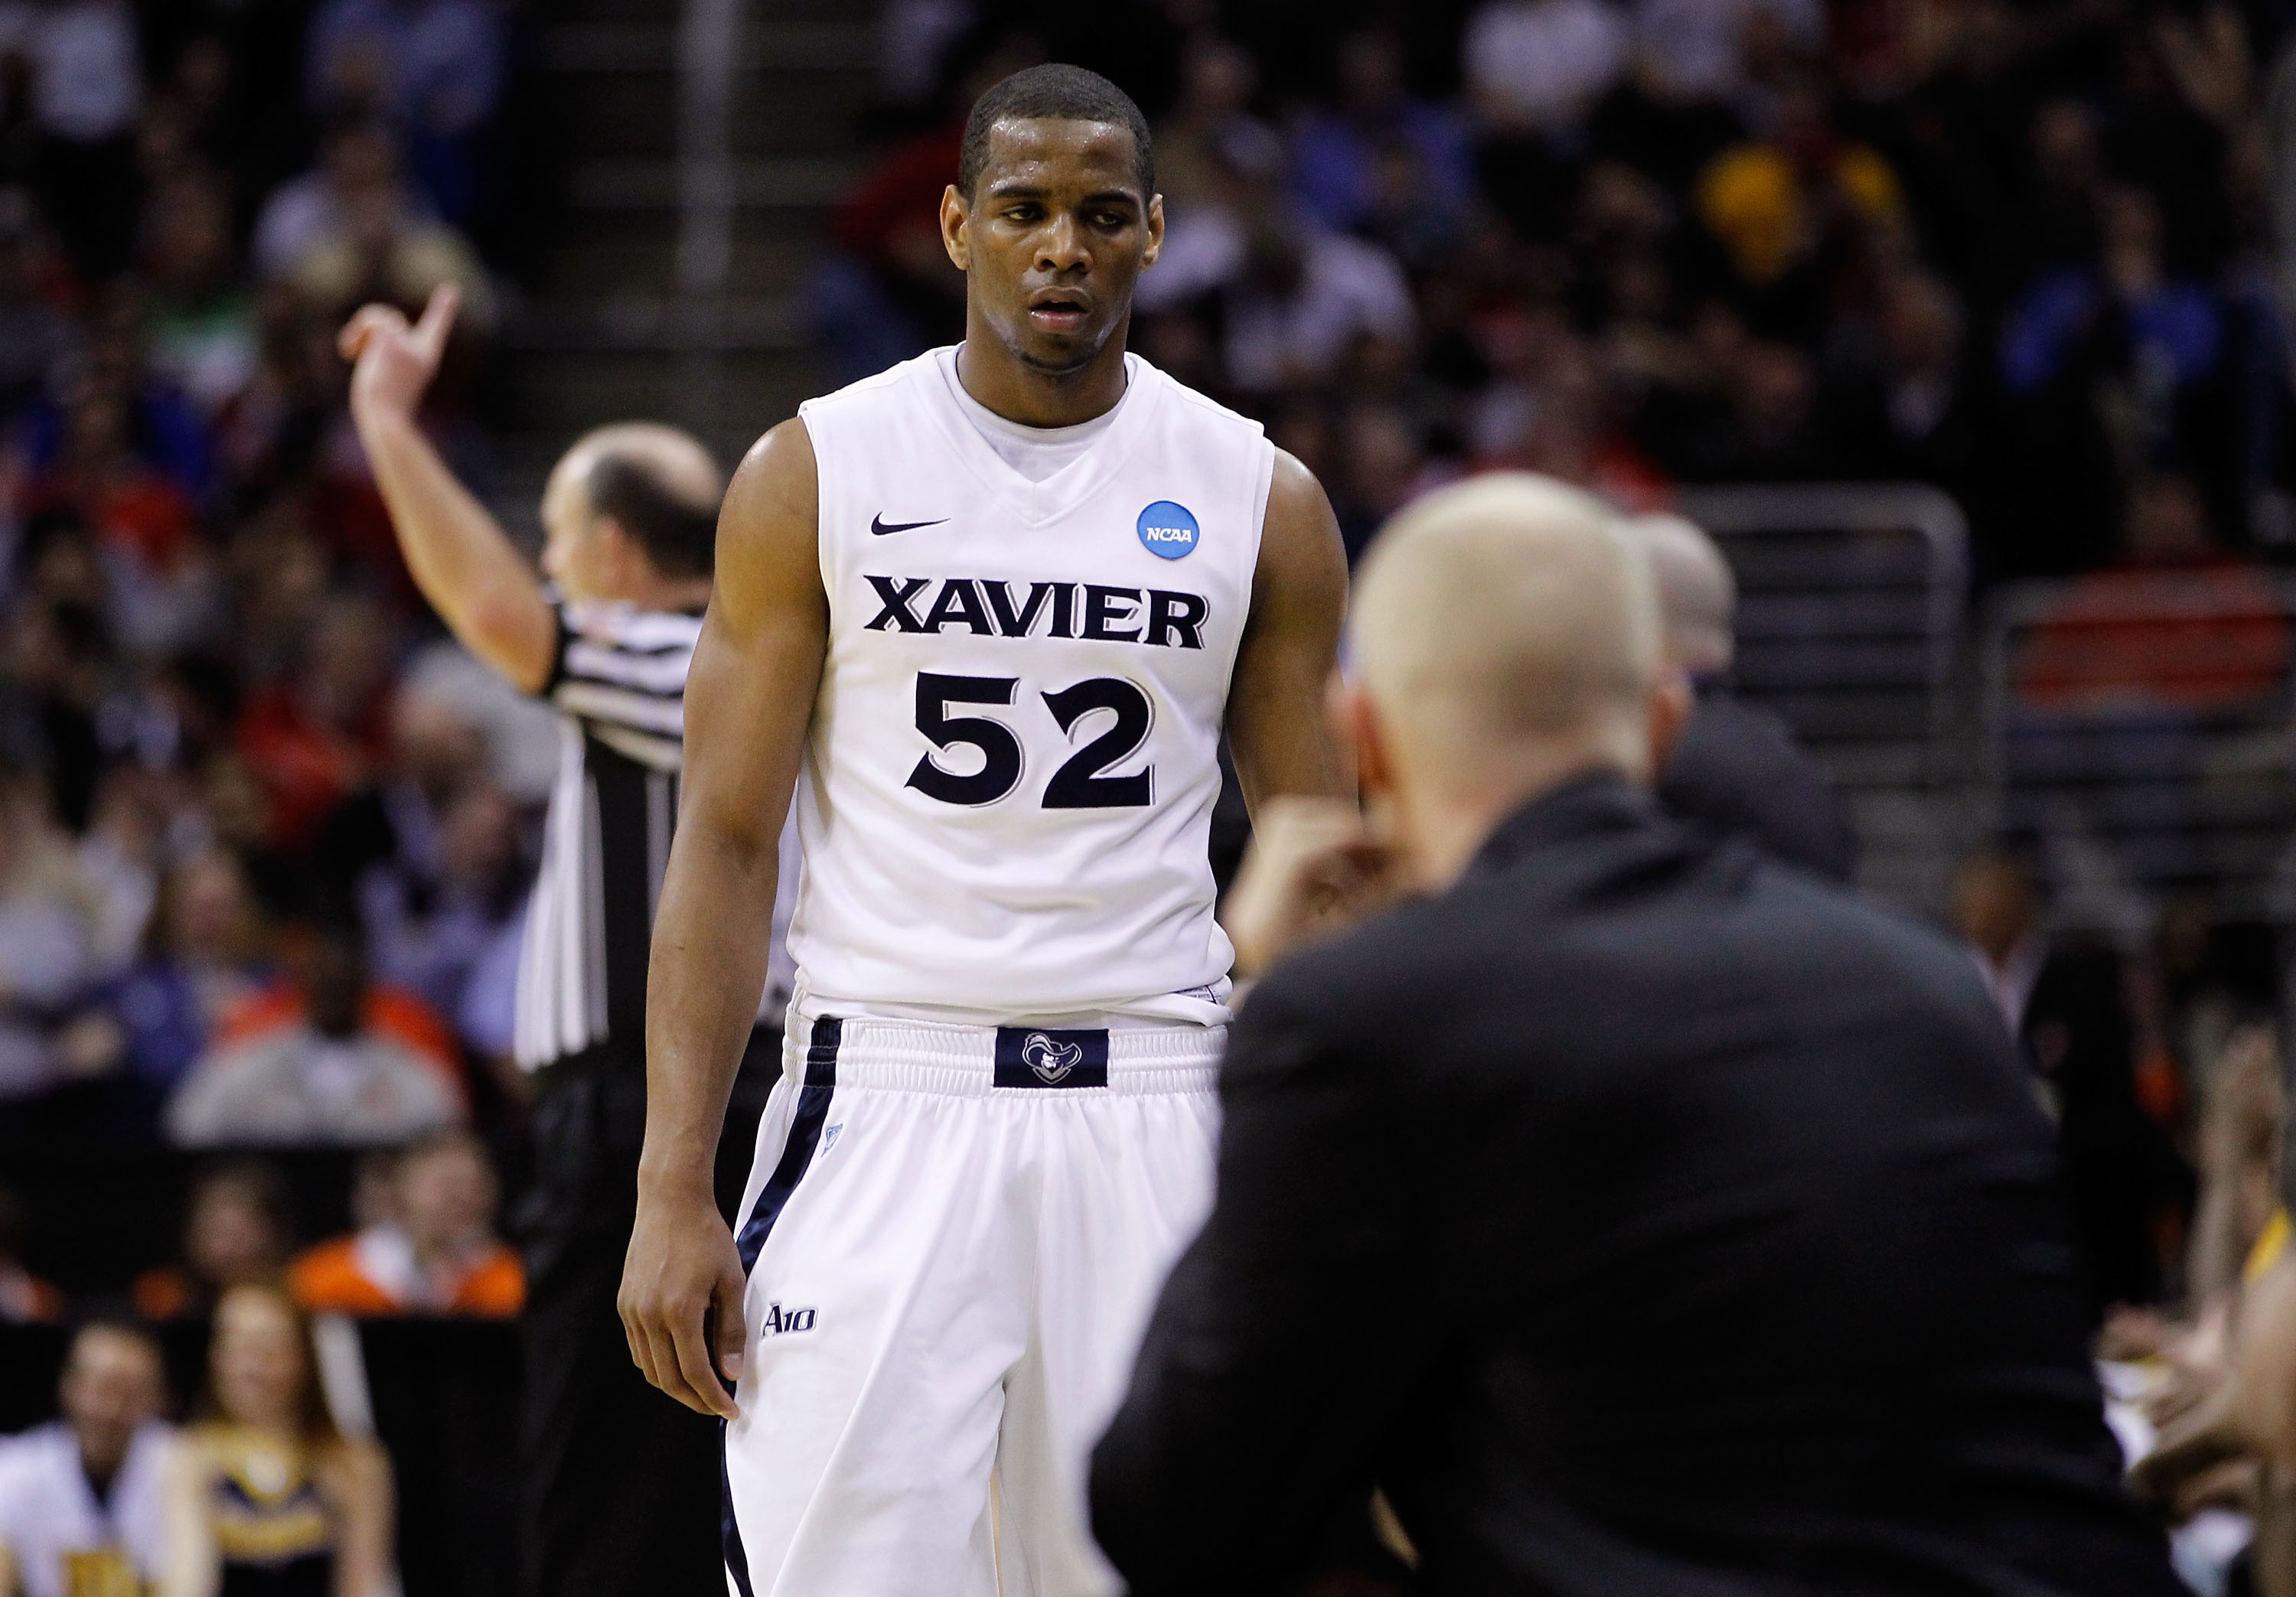 CLEVELAND, OH - MARCH 18: Tu Holloway #52 of the Xavier Musketeers walks to the bench late in the second half against the Marquette Golden Eagles during the second round of the 2011 NCAA men's basketball tournament at Quicken Loans Arena on March 18, 2011